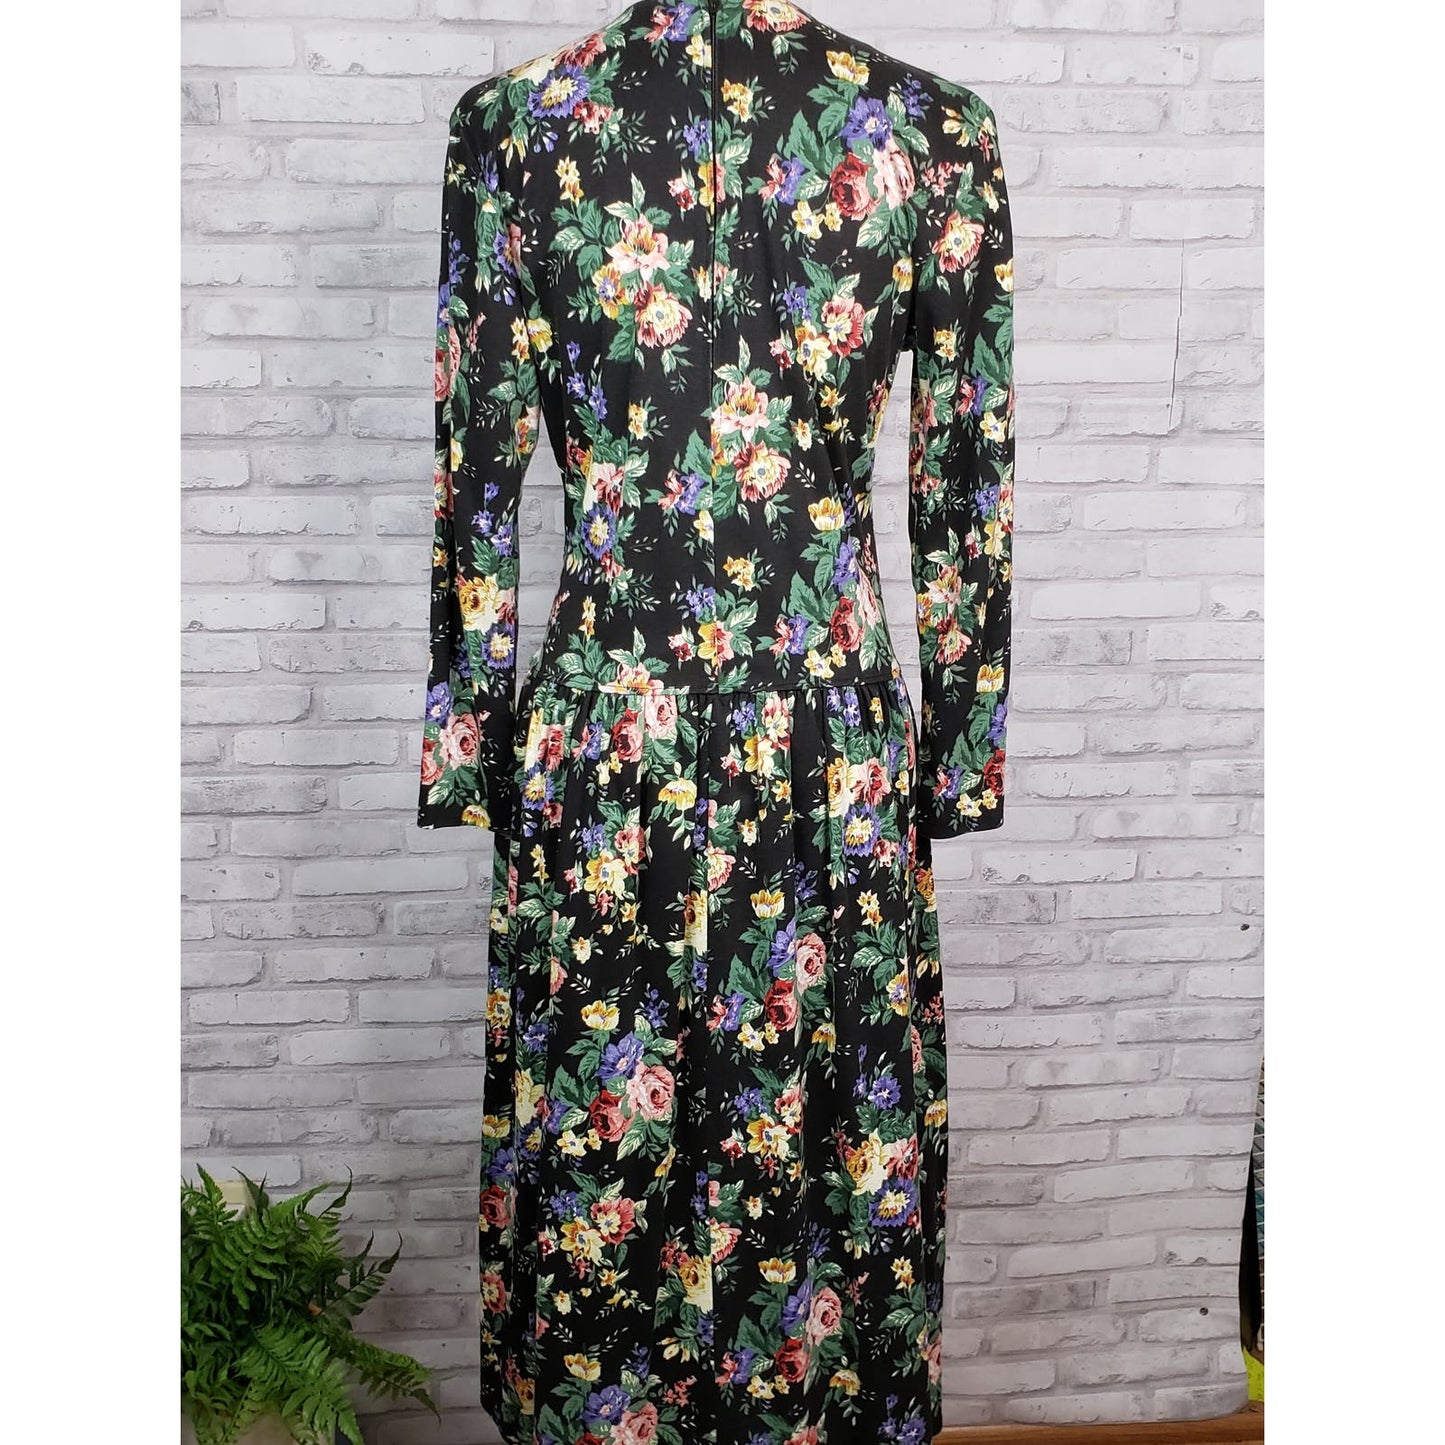 Black floral dress with lace bib size 12 prairie style midi with pockets, vintage 1990s cottagecore grunge